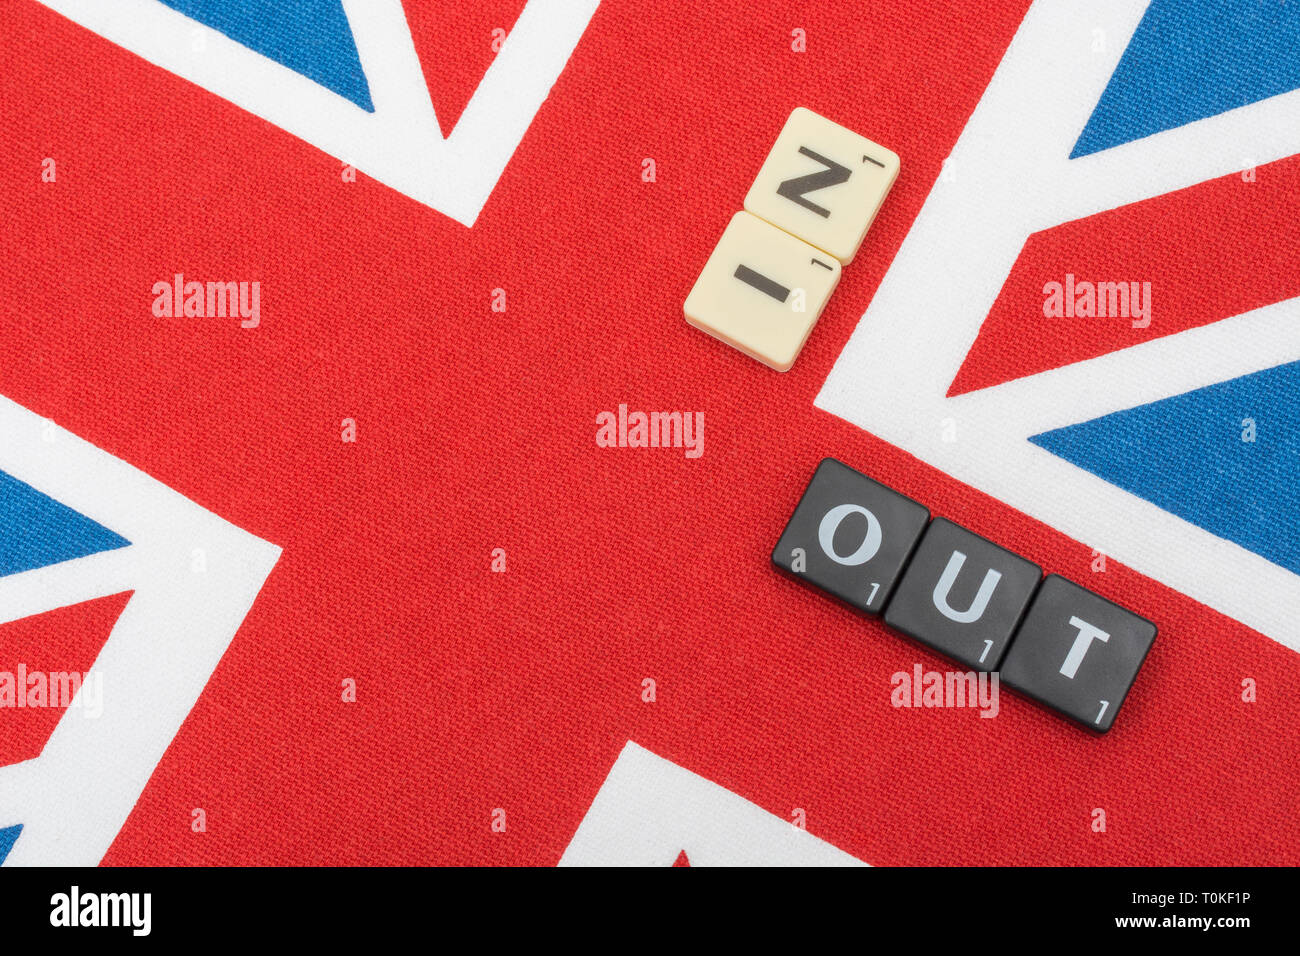 Union Jack with In/Out Brexit motif, with regard to staying in or exiting the EU, and the Cancel Brexit petition. Stock Photo